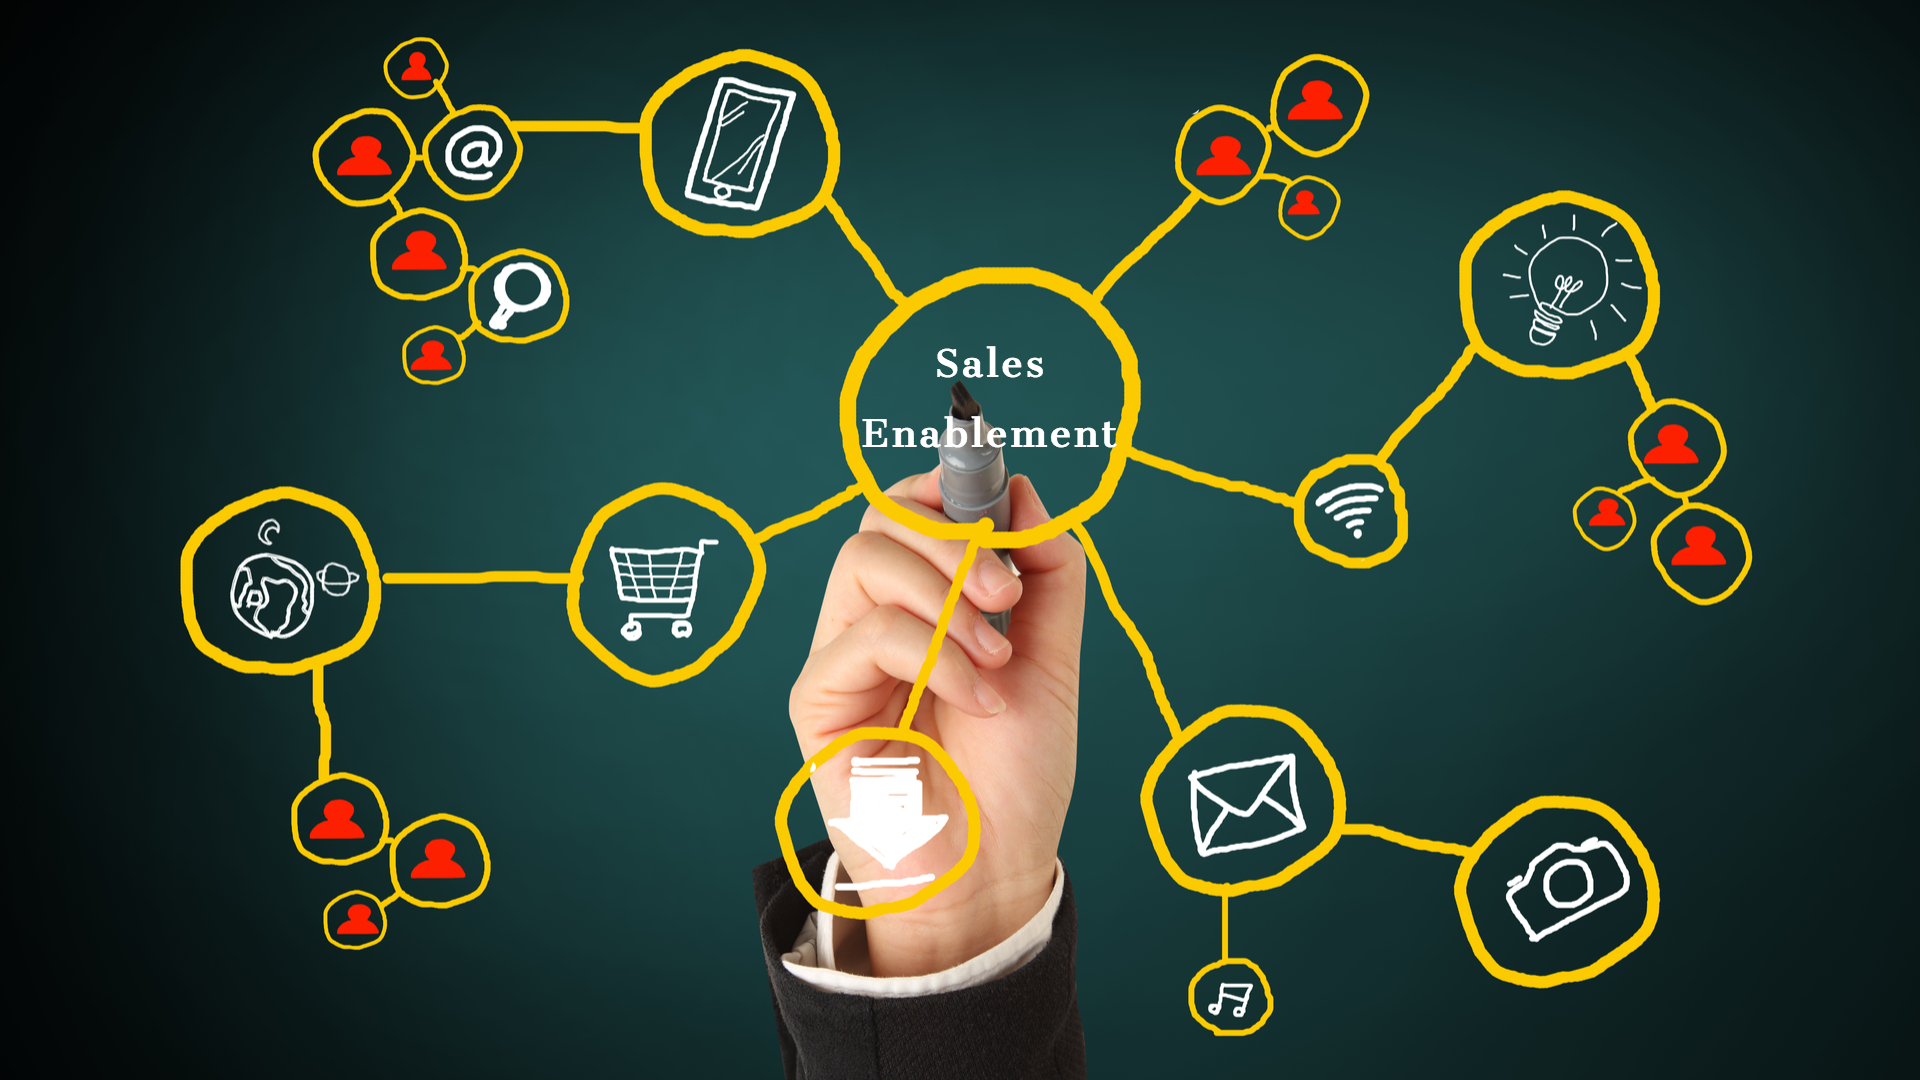 HOW TO BUILD A STRONG SALES ENABLEMENT PROGRAM FOR REVENUE GROWTH 2020